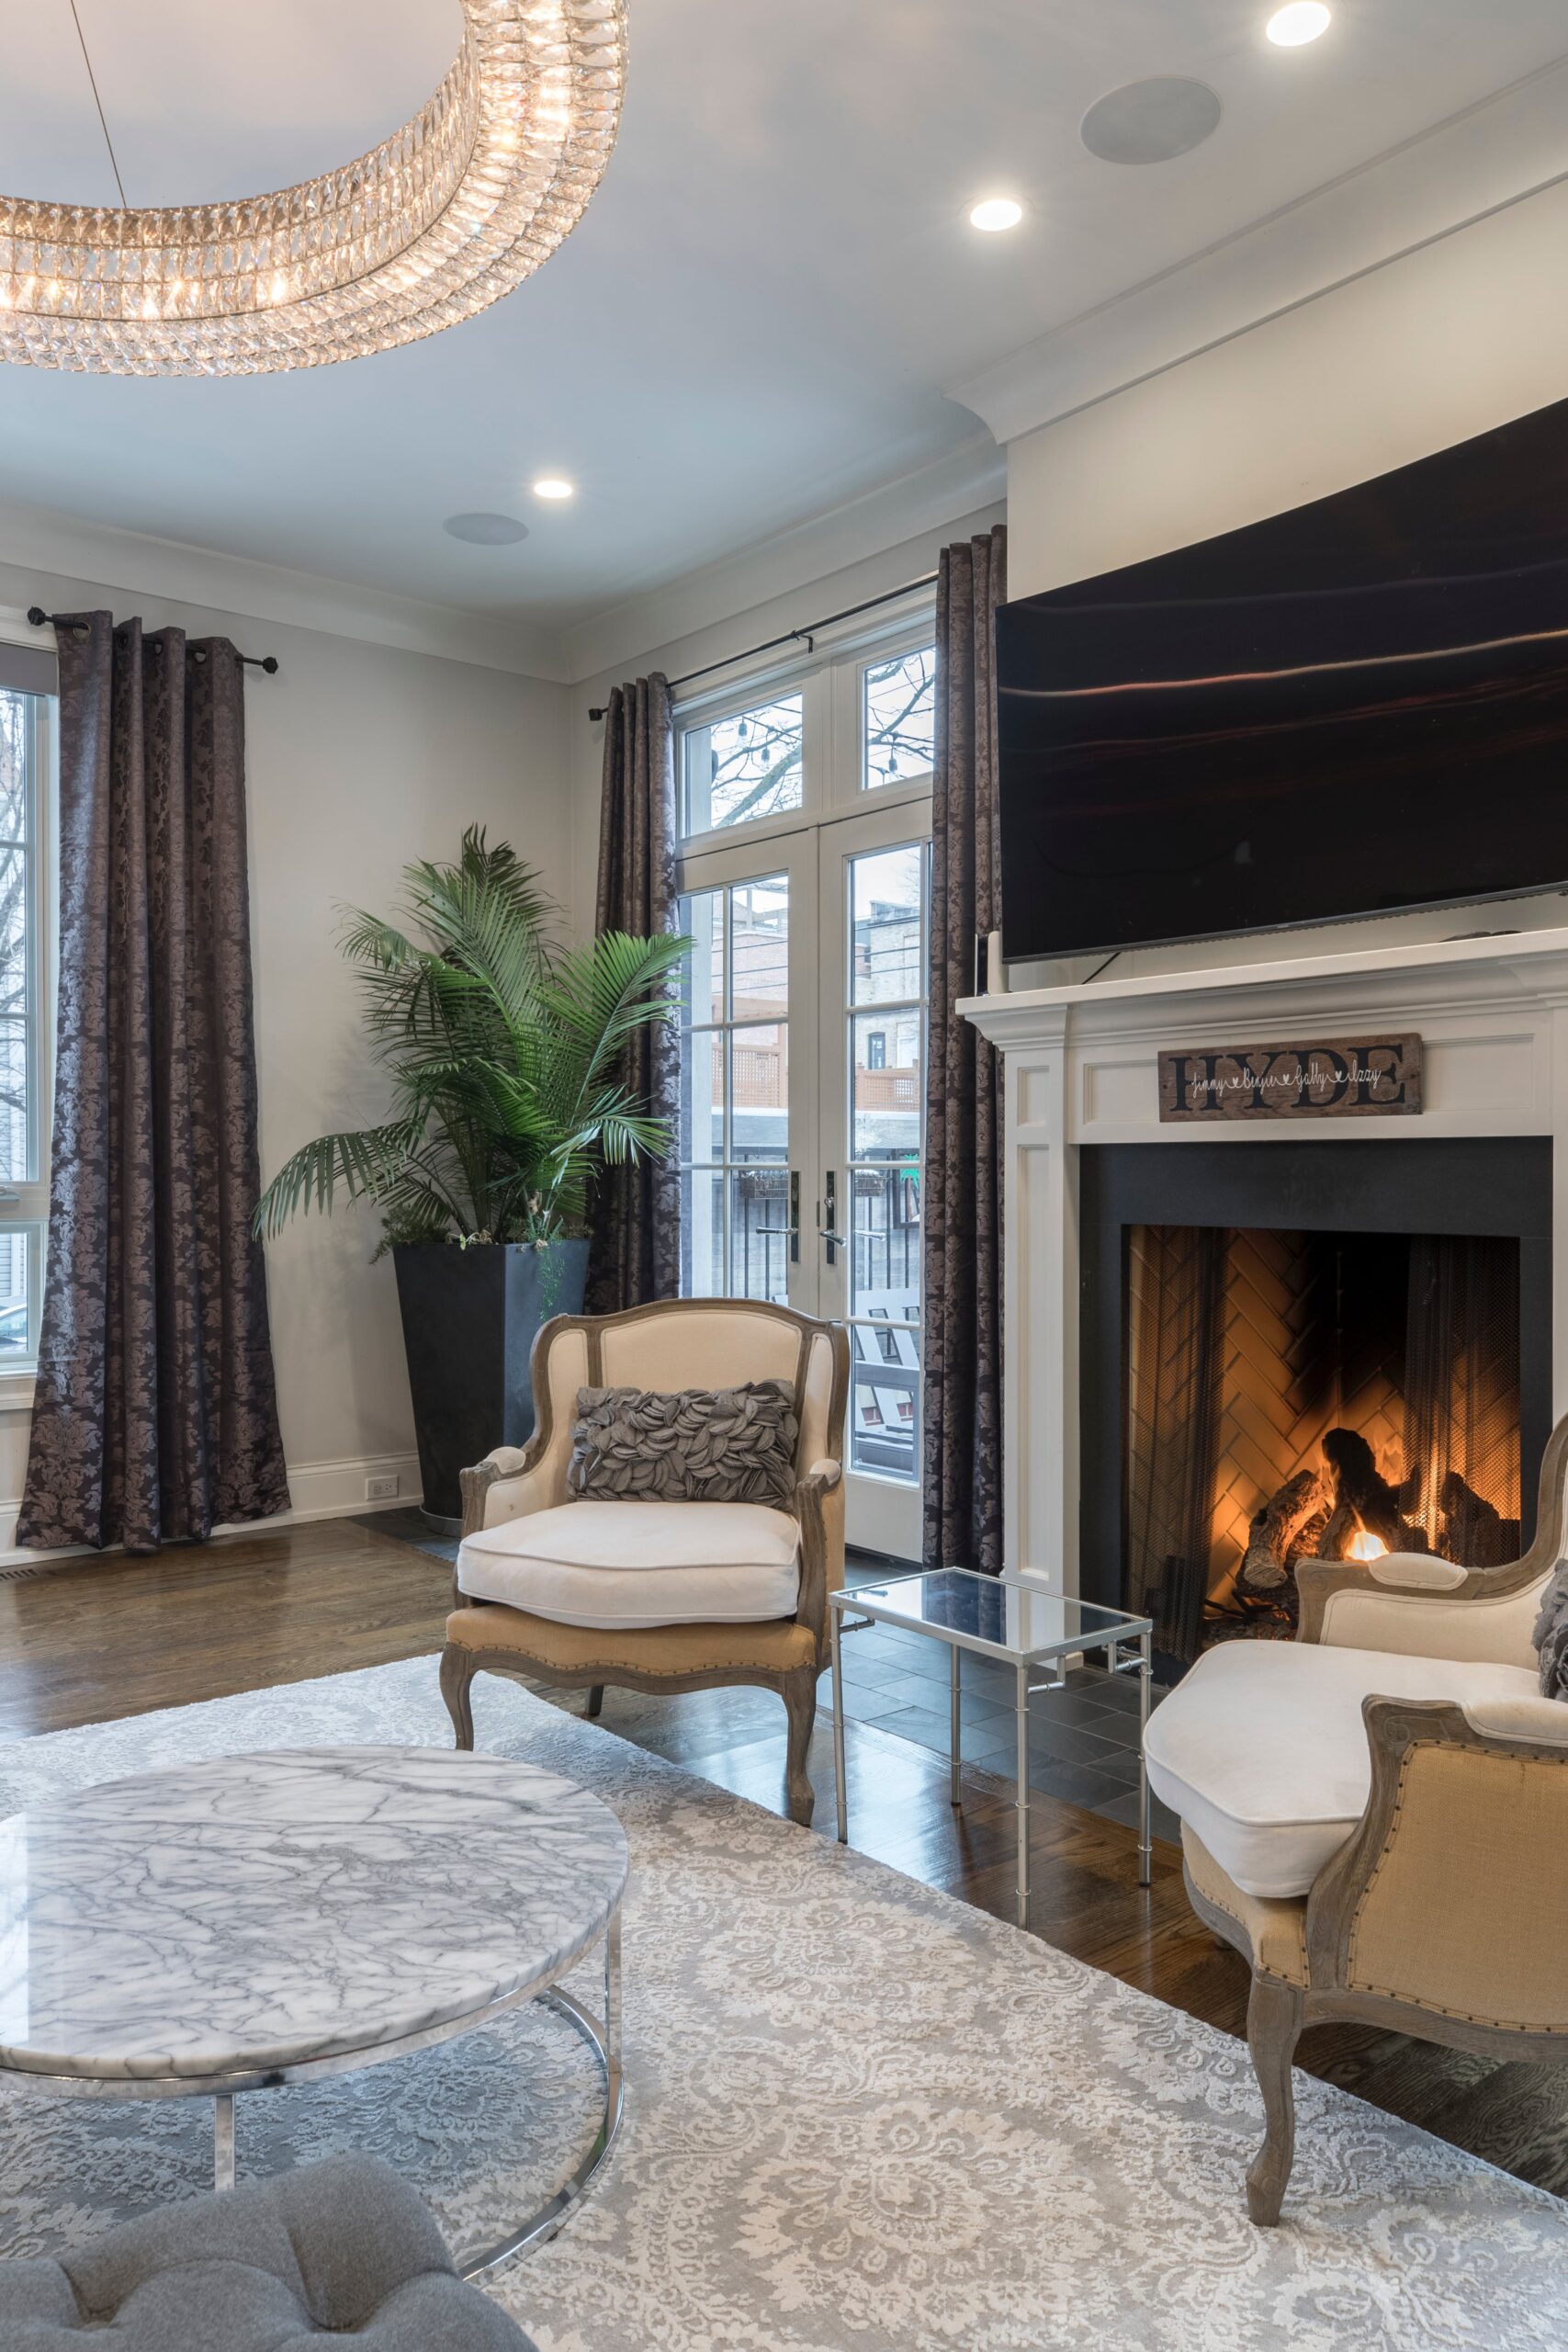 Fireplace Maintenance Tips to Keep Your Fireplaces in Optimal Condition